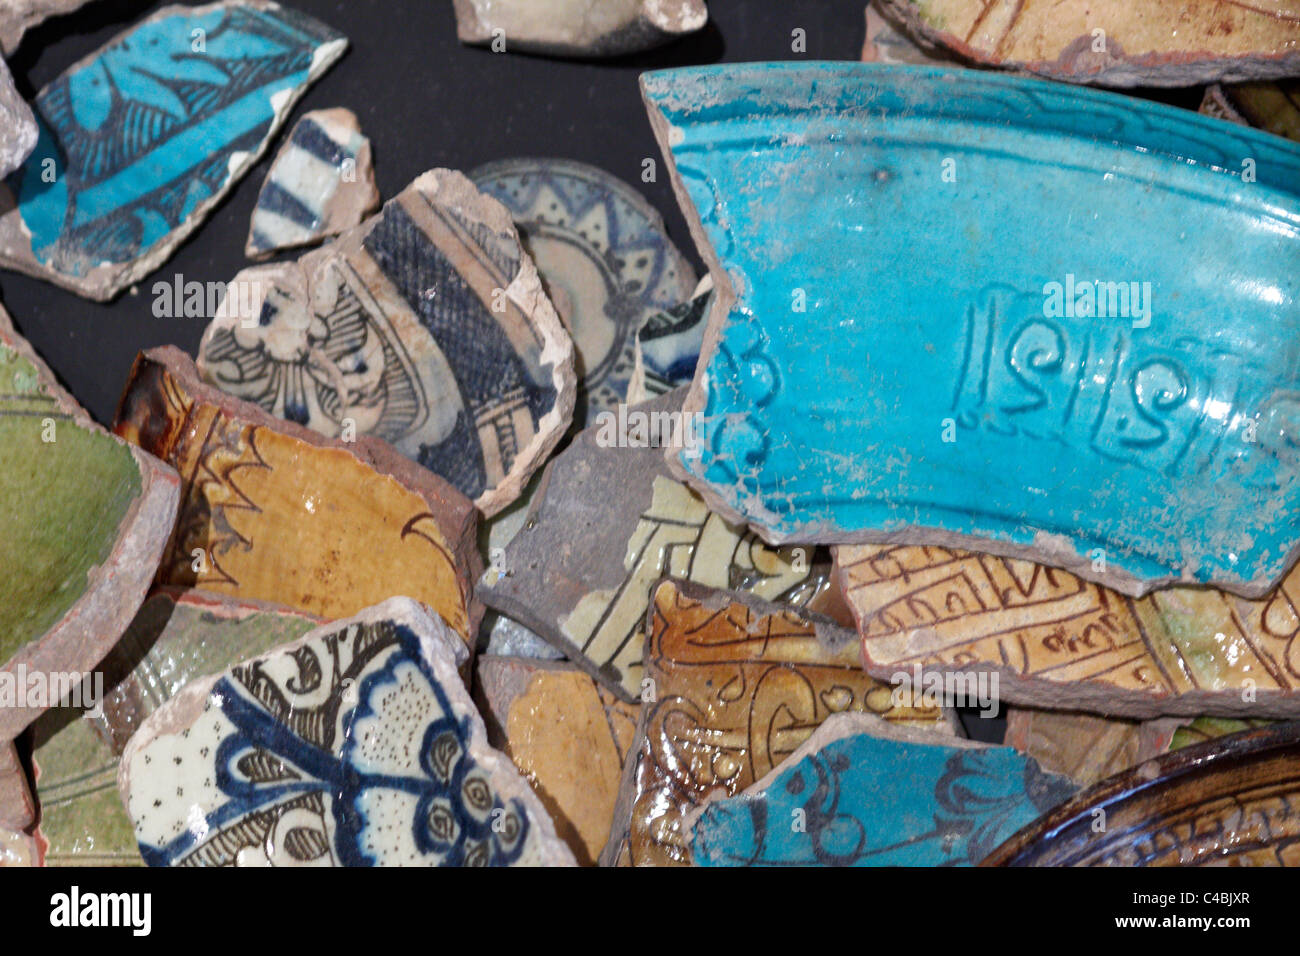 Fatimid and Mamluk pottery shards worth £10,000 forming part of a Christies auction of Islamic and Indian Art Stock Photo